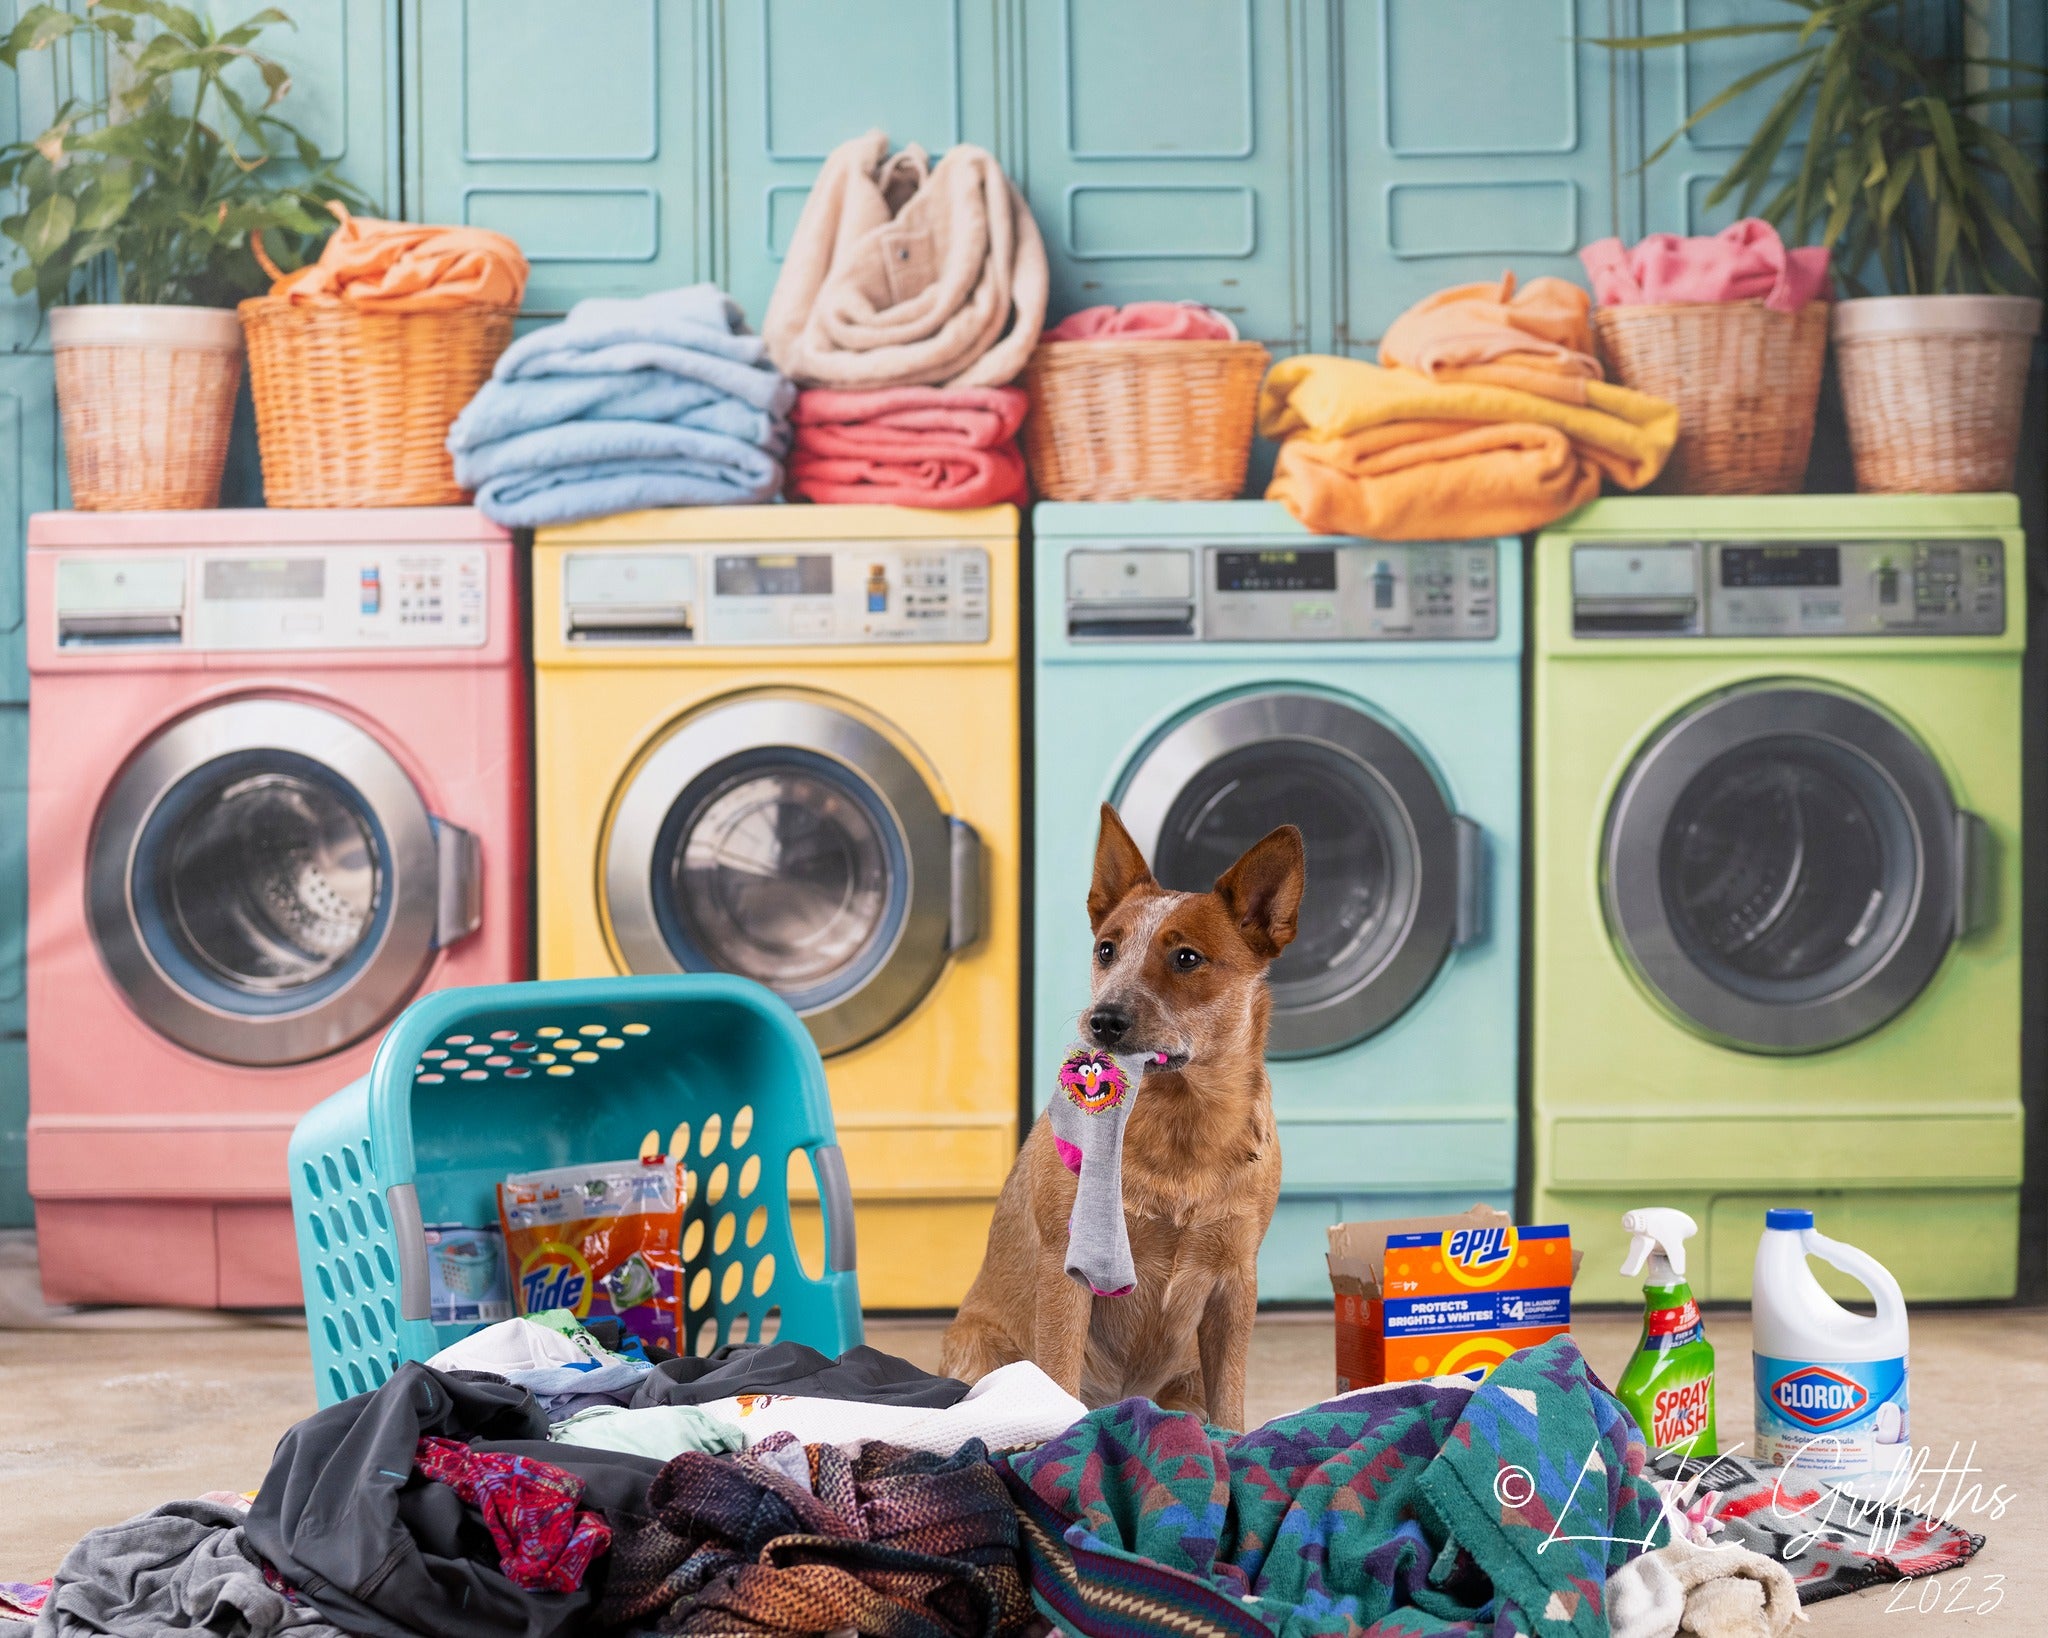 Dog sitting in pile of dirty clothes in front of washing machine backdrop